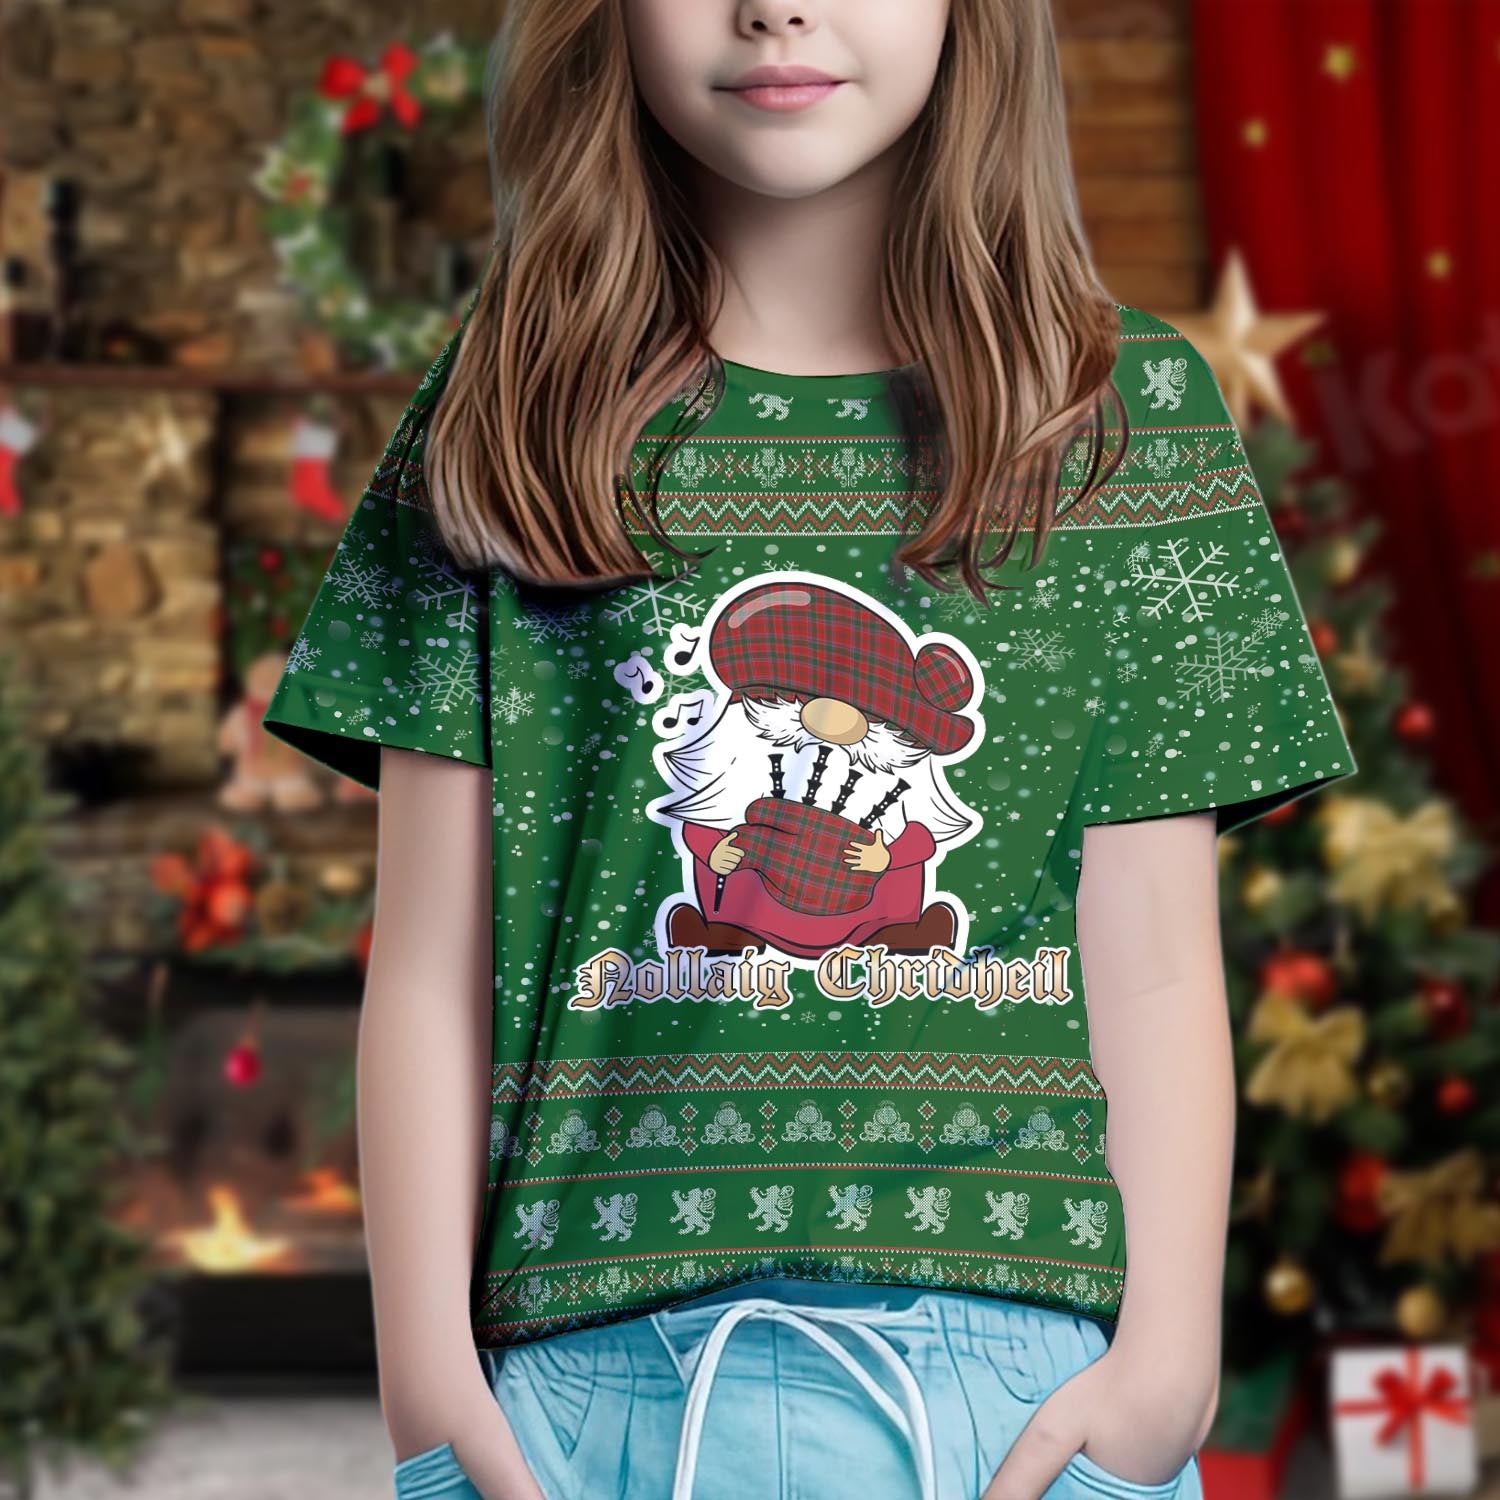 Dalzell (Dalziel) Clan Christmas Family T-Shirt with Funny Gnome Playing Bagpipes Kid's Shirt Green - Tartanvibesclothing